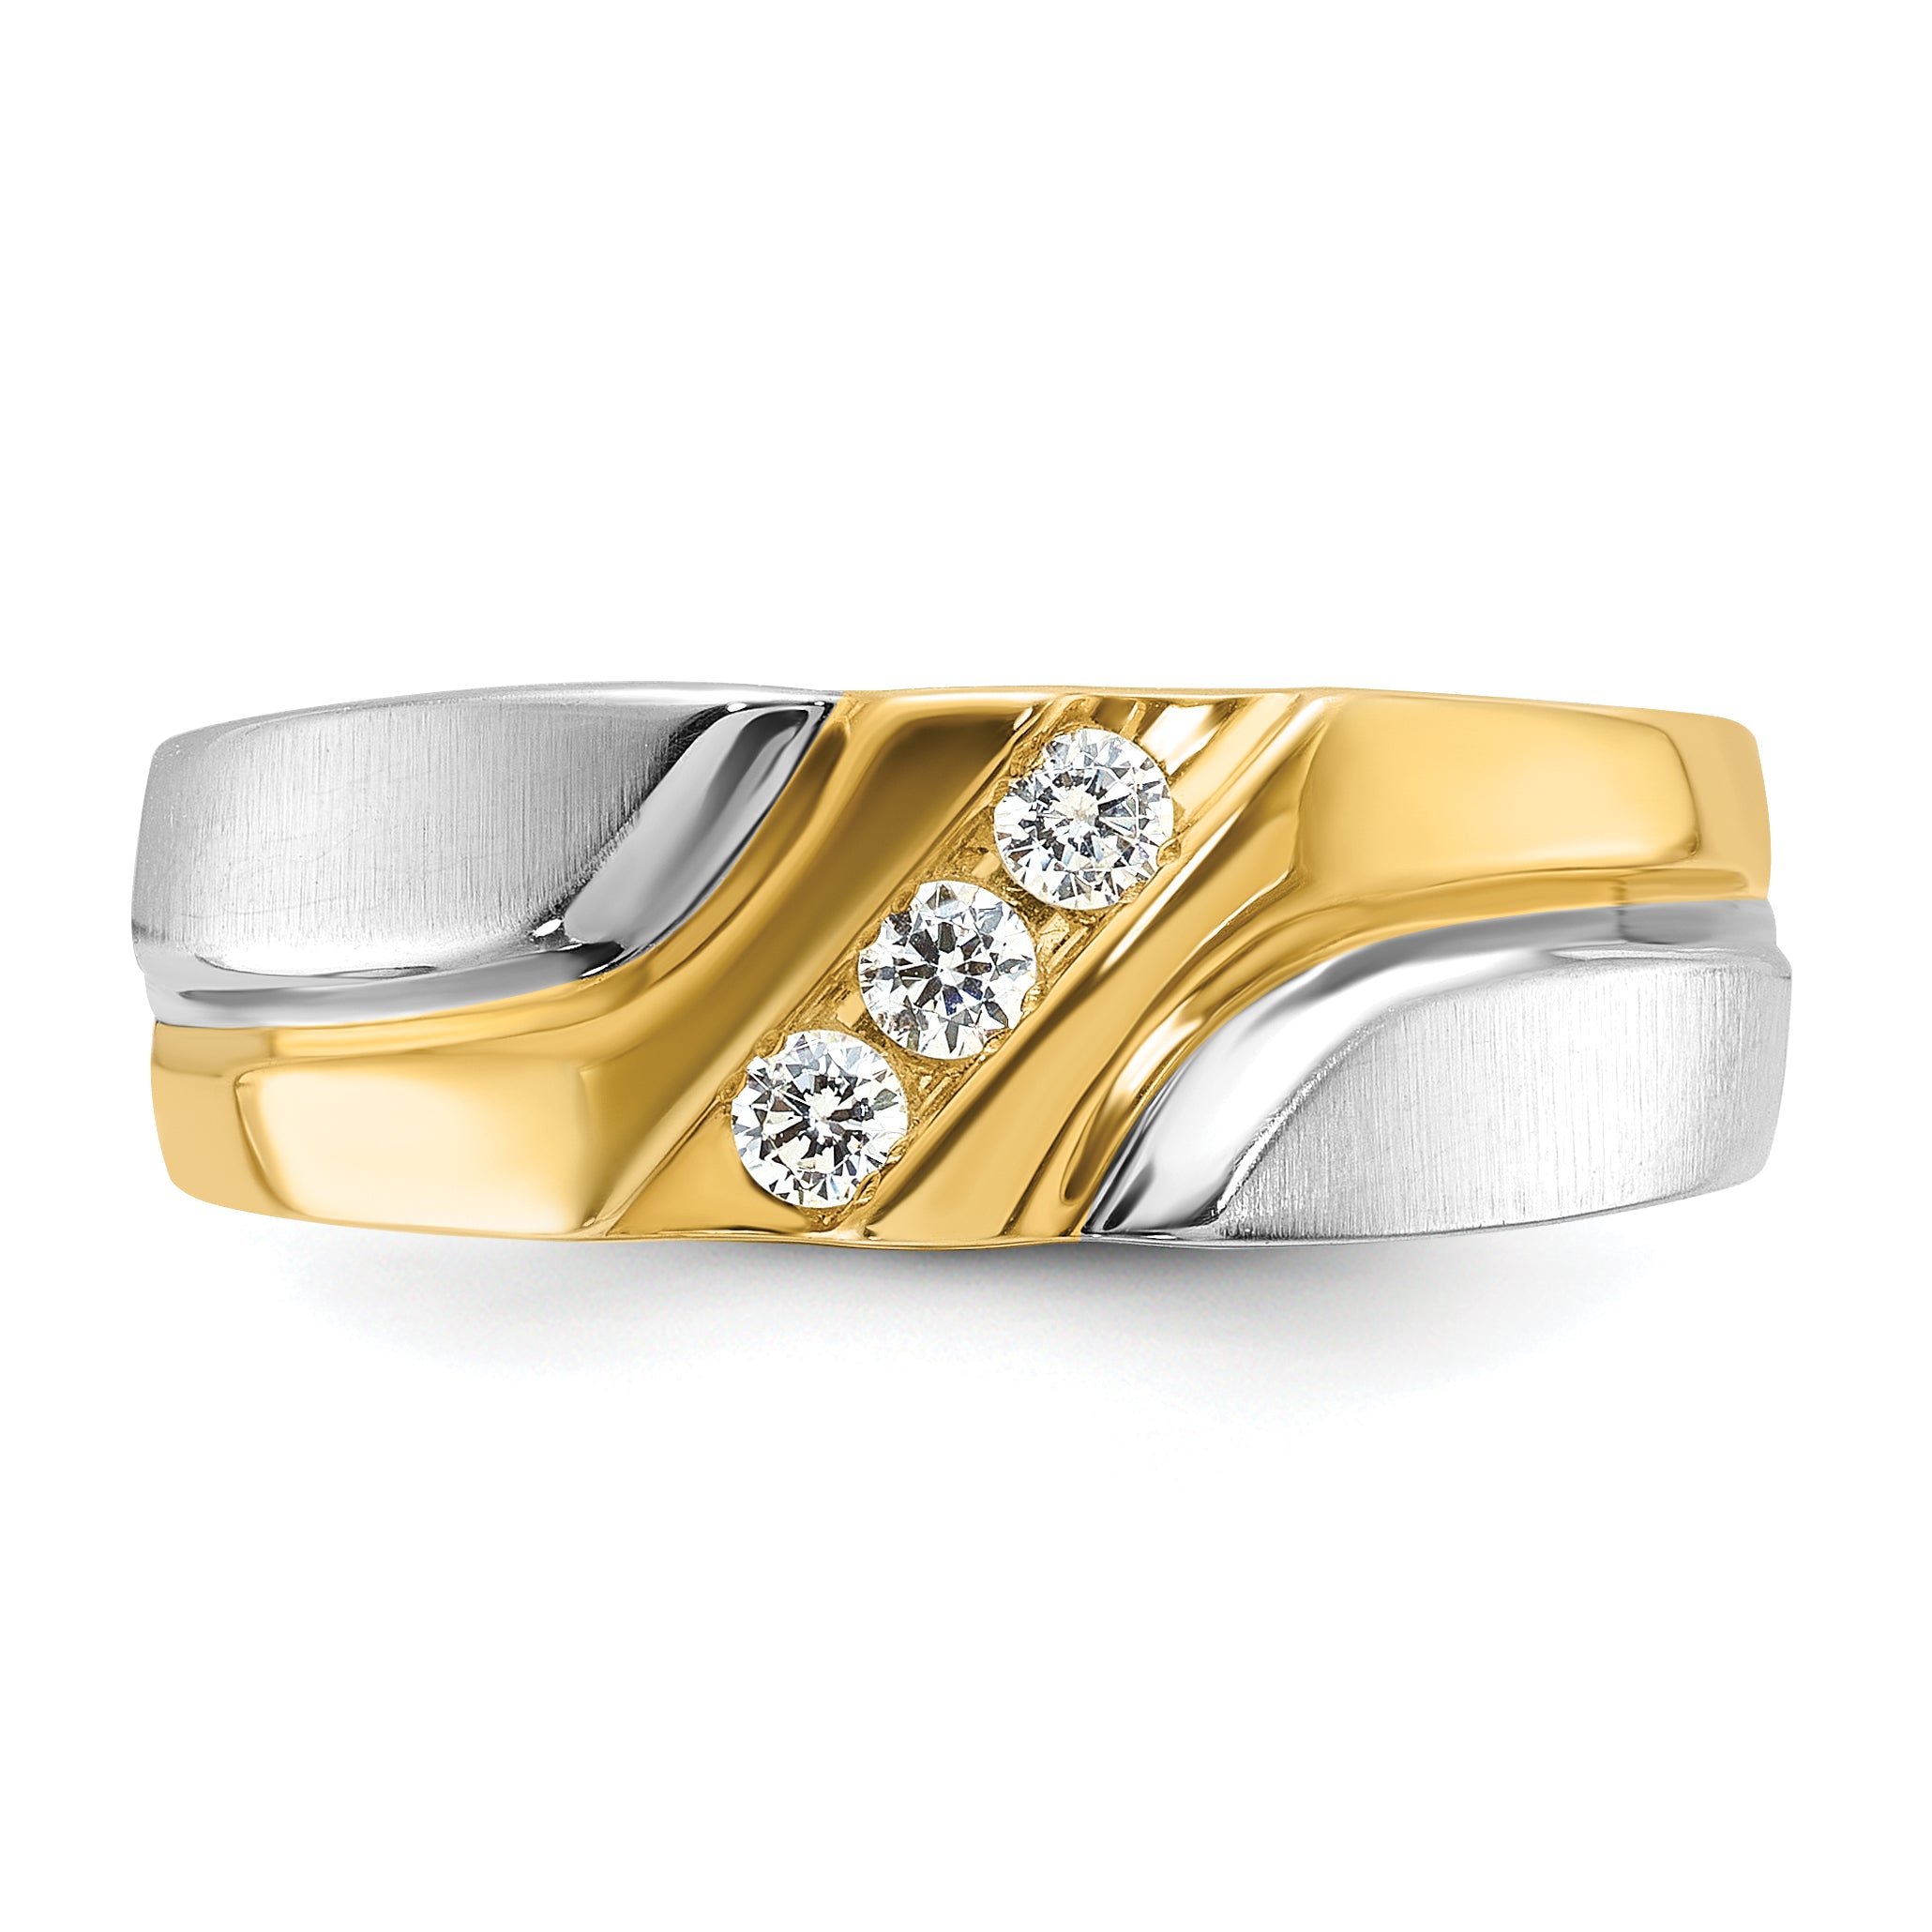 IBGoodman 10k Two-tone Men's Polished Satin and Grooved 3-Stone 1/6 Carat A Quality Diamond Ring